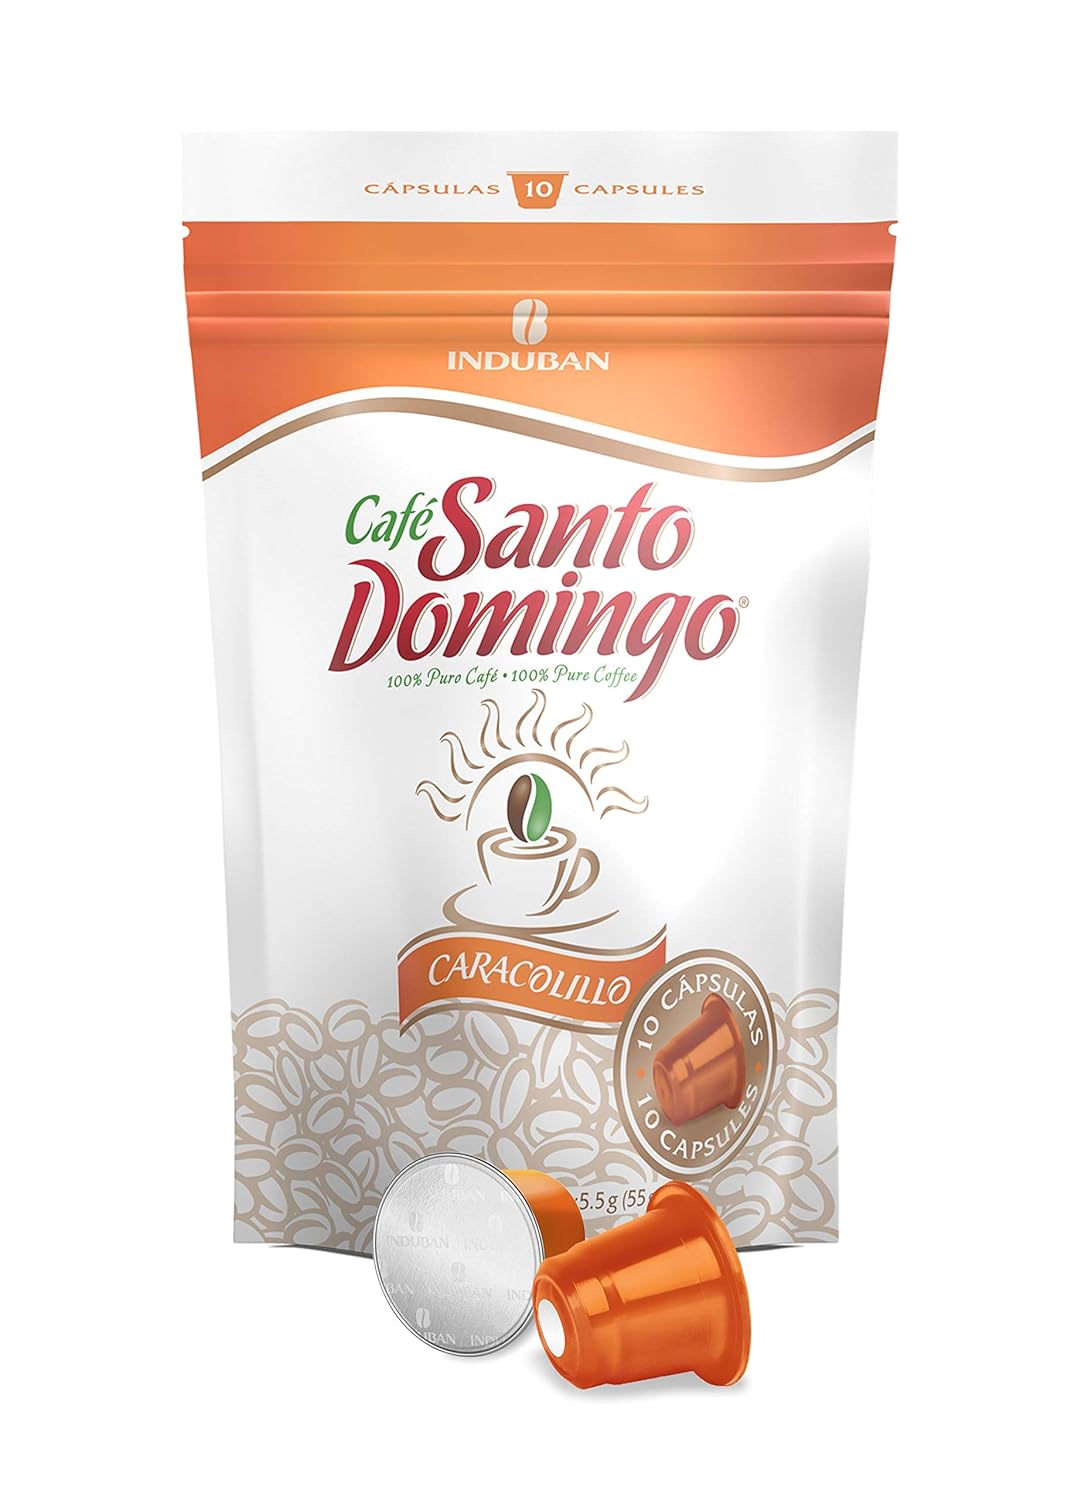 Santo Domingo Coffee Capsules Bundle: Classic, Intenso, Peaberry – 30 Count Variety Pack - Compatible with Nespresso Original Brewers · Products from the Dominican Republic